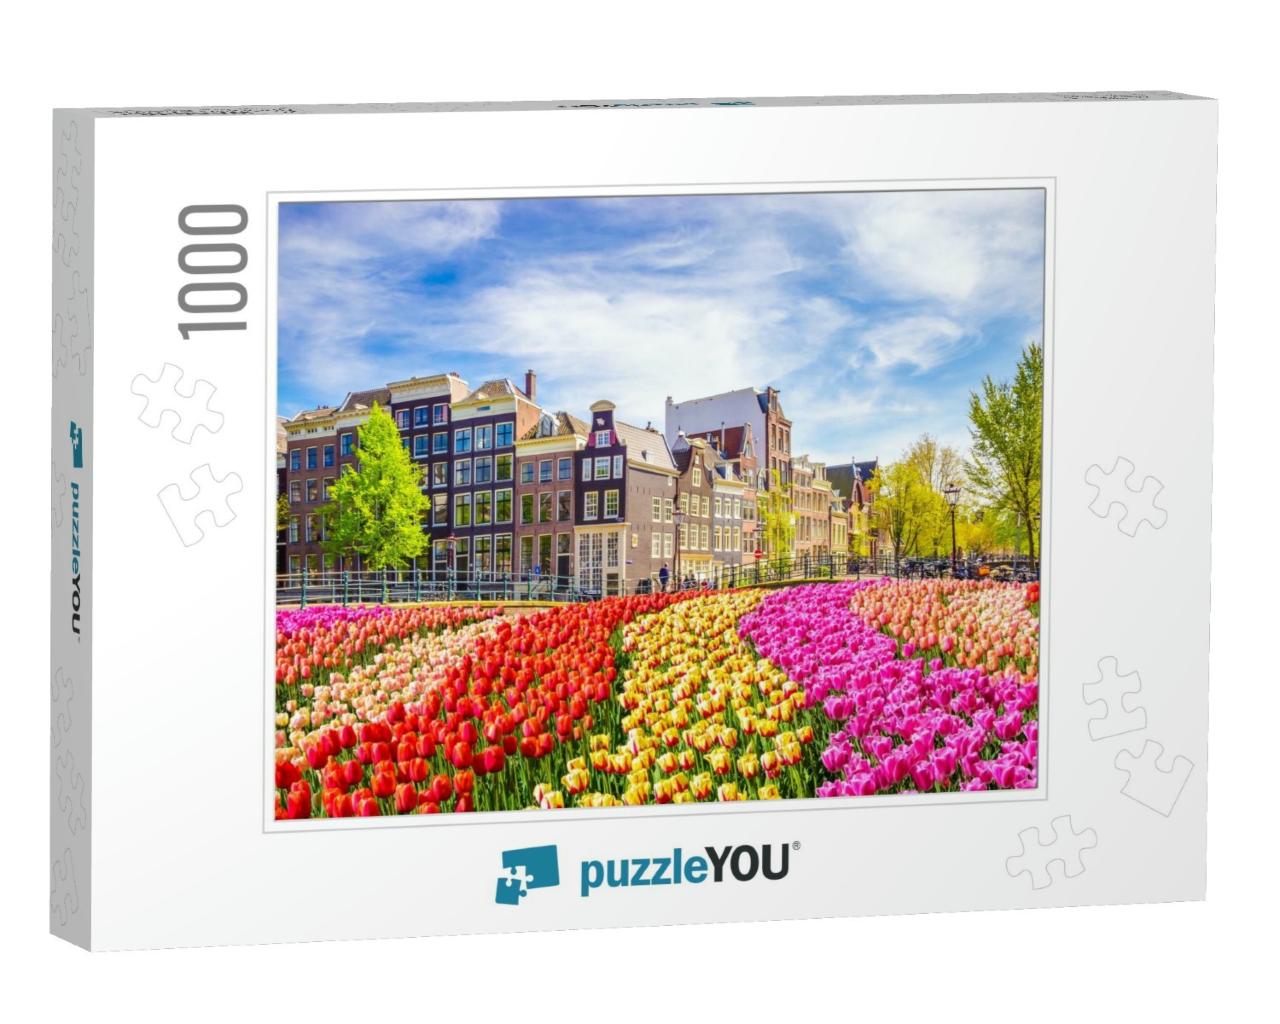 Traditional Old Buildings & Tulips in Amsterdam, Netherla... Jigsaw Puzzle with 1000 pieces